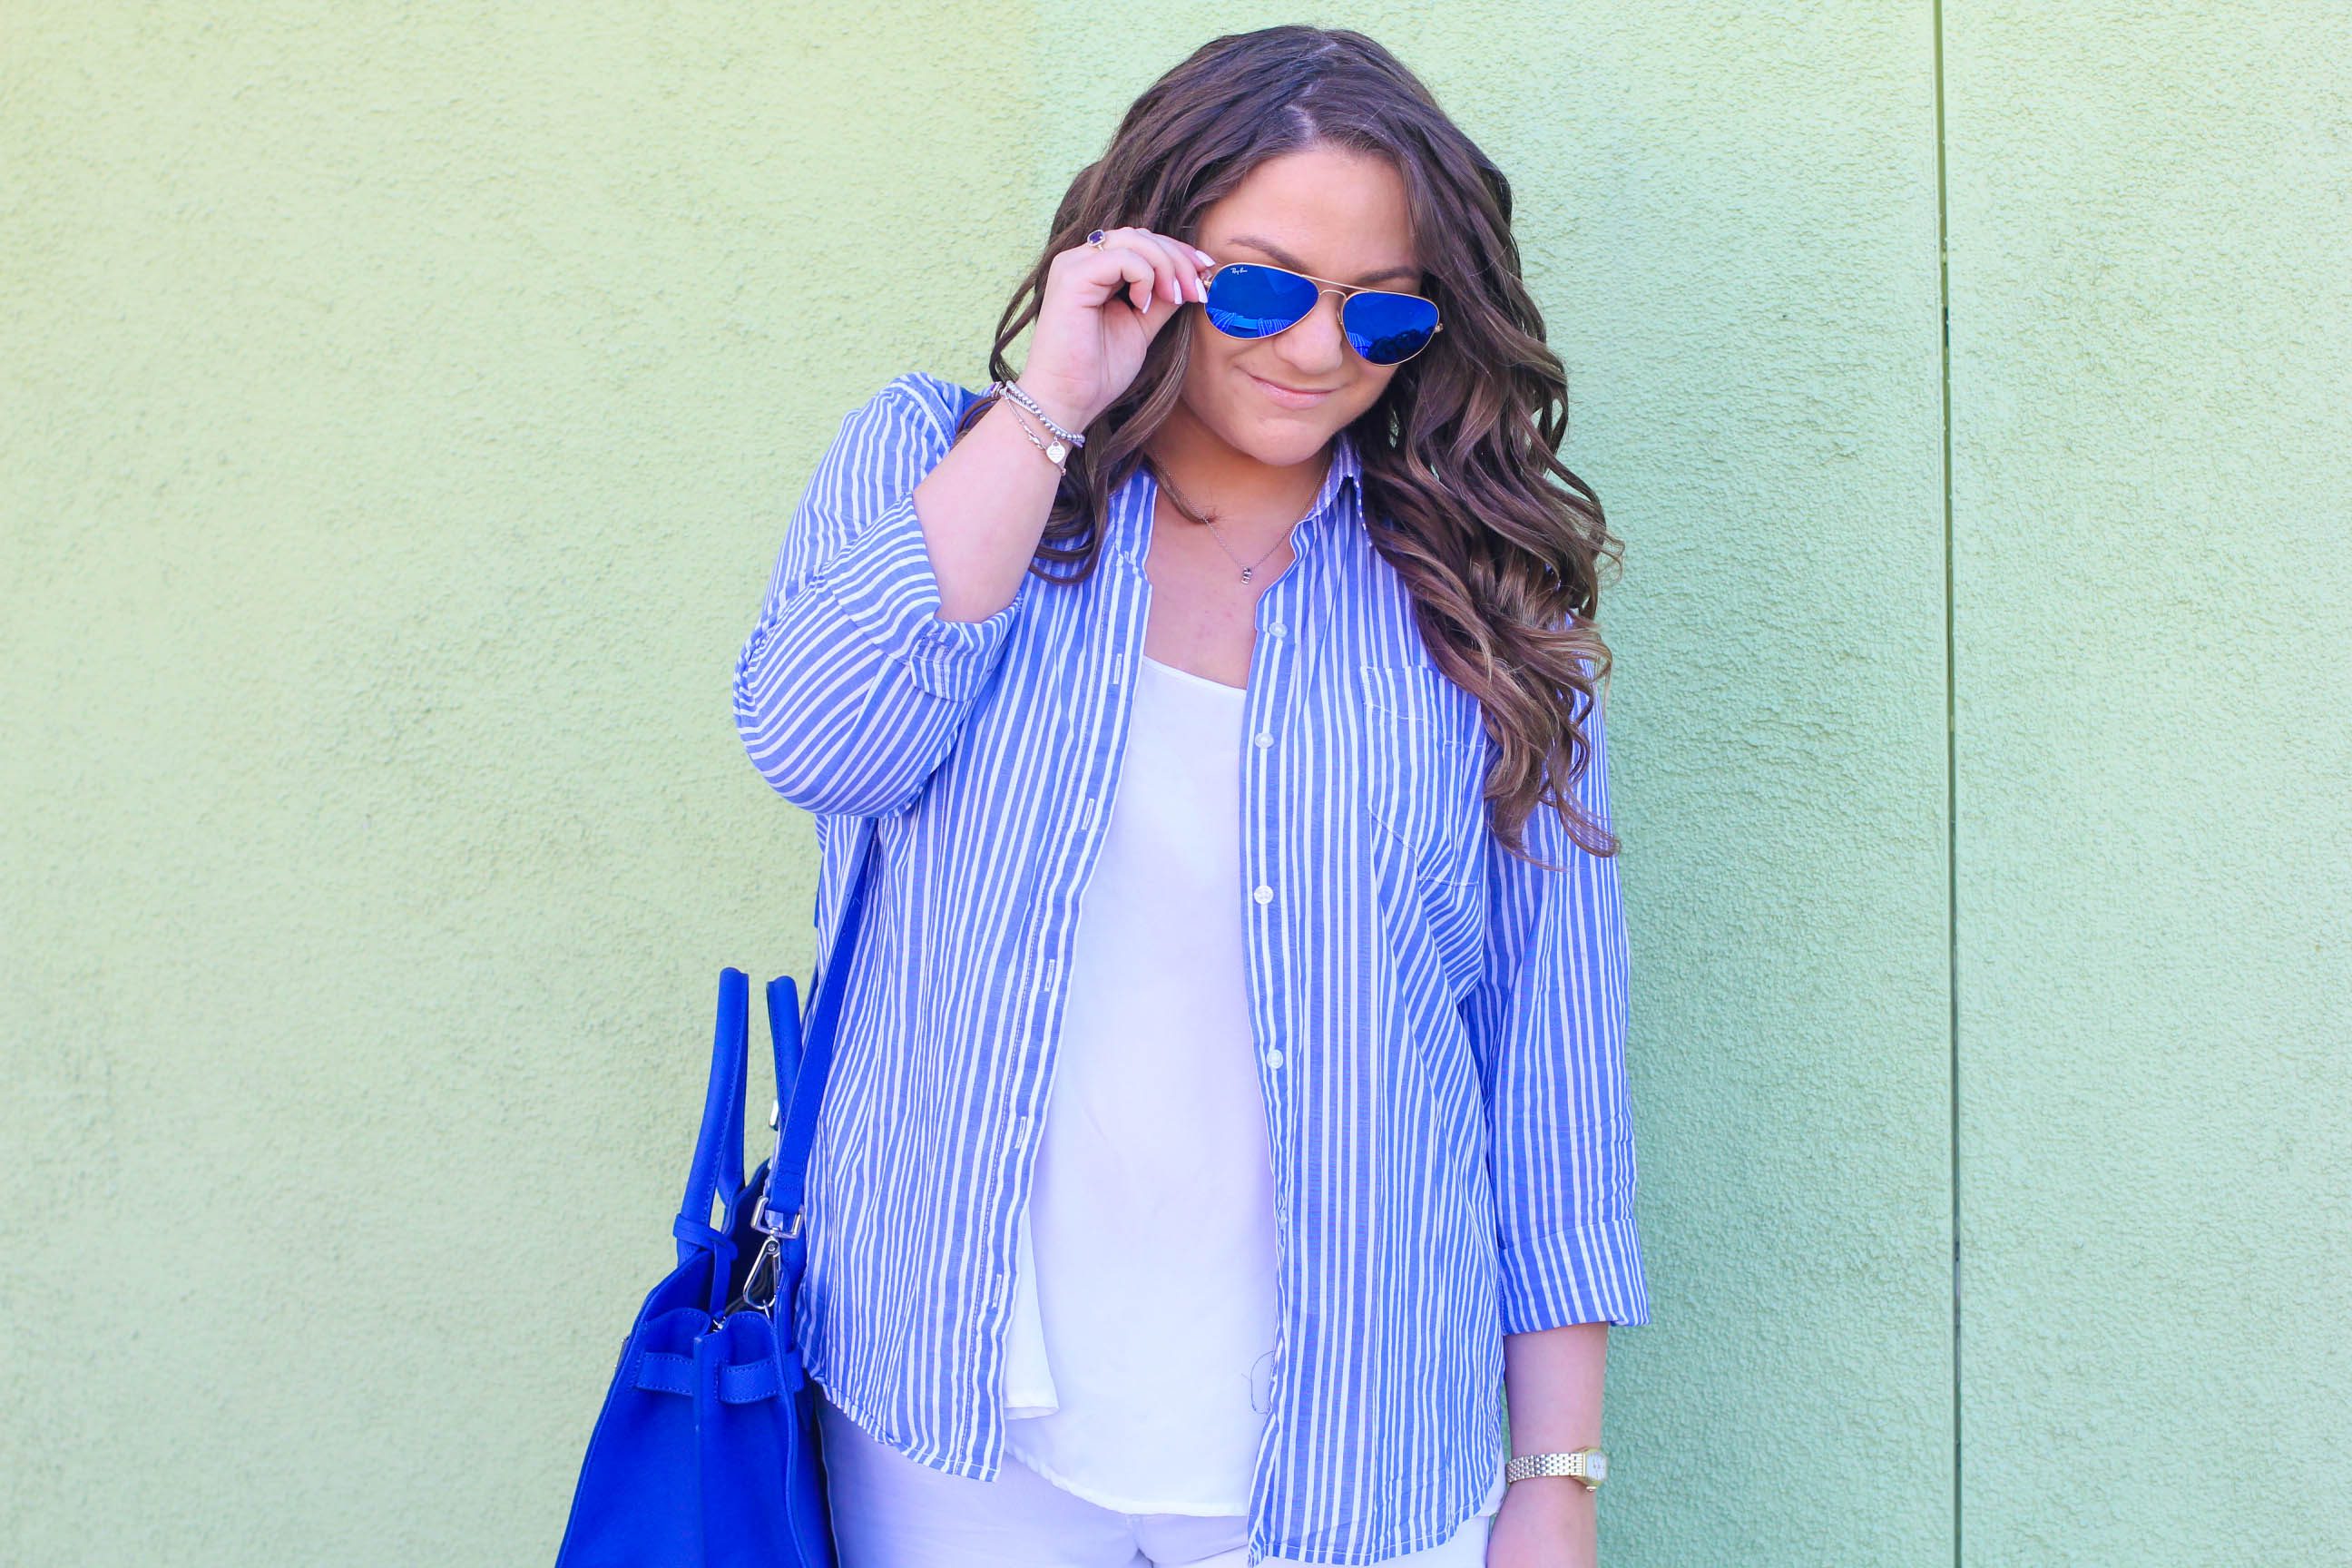 missyonmadison, melissa tierney, old navy, fashion blogger, spring style, spring trends, old navy style, fashion blogger, la blogger, neo nauticaul, nautical, white skinny jeans, white jeans, cobalt blue satchel, pin stripe shirt, striped button down, style blogger, espadrille wedges, style goals, old navy rockstar jeans,